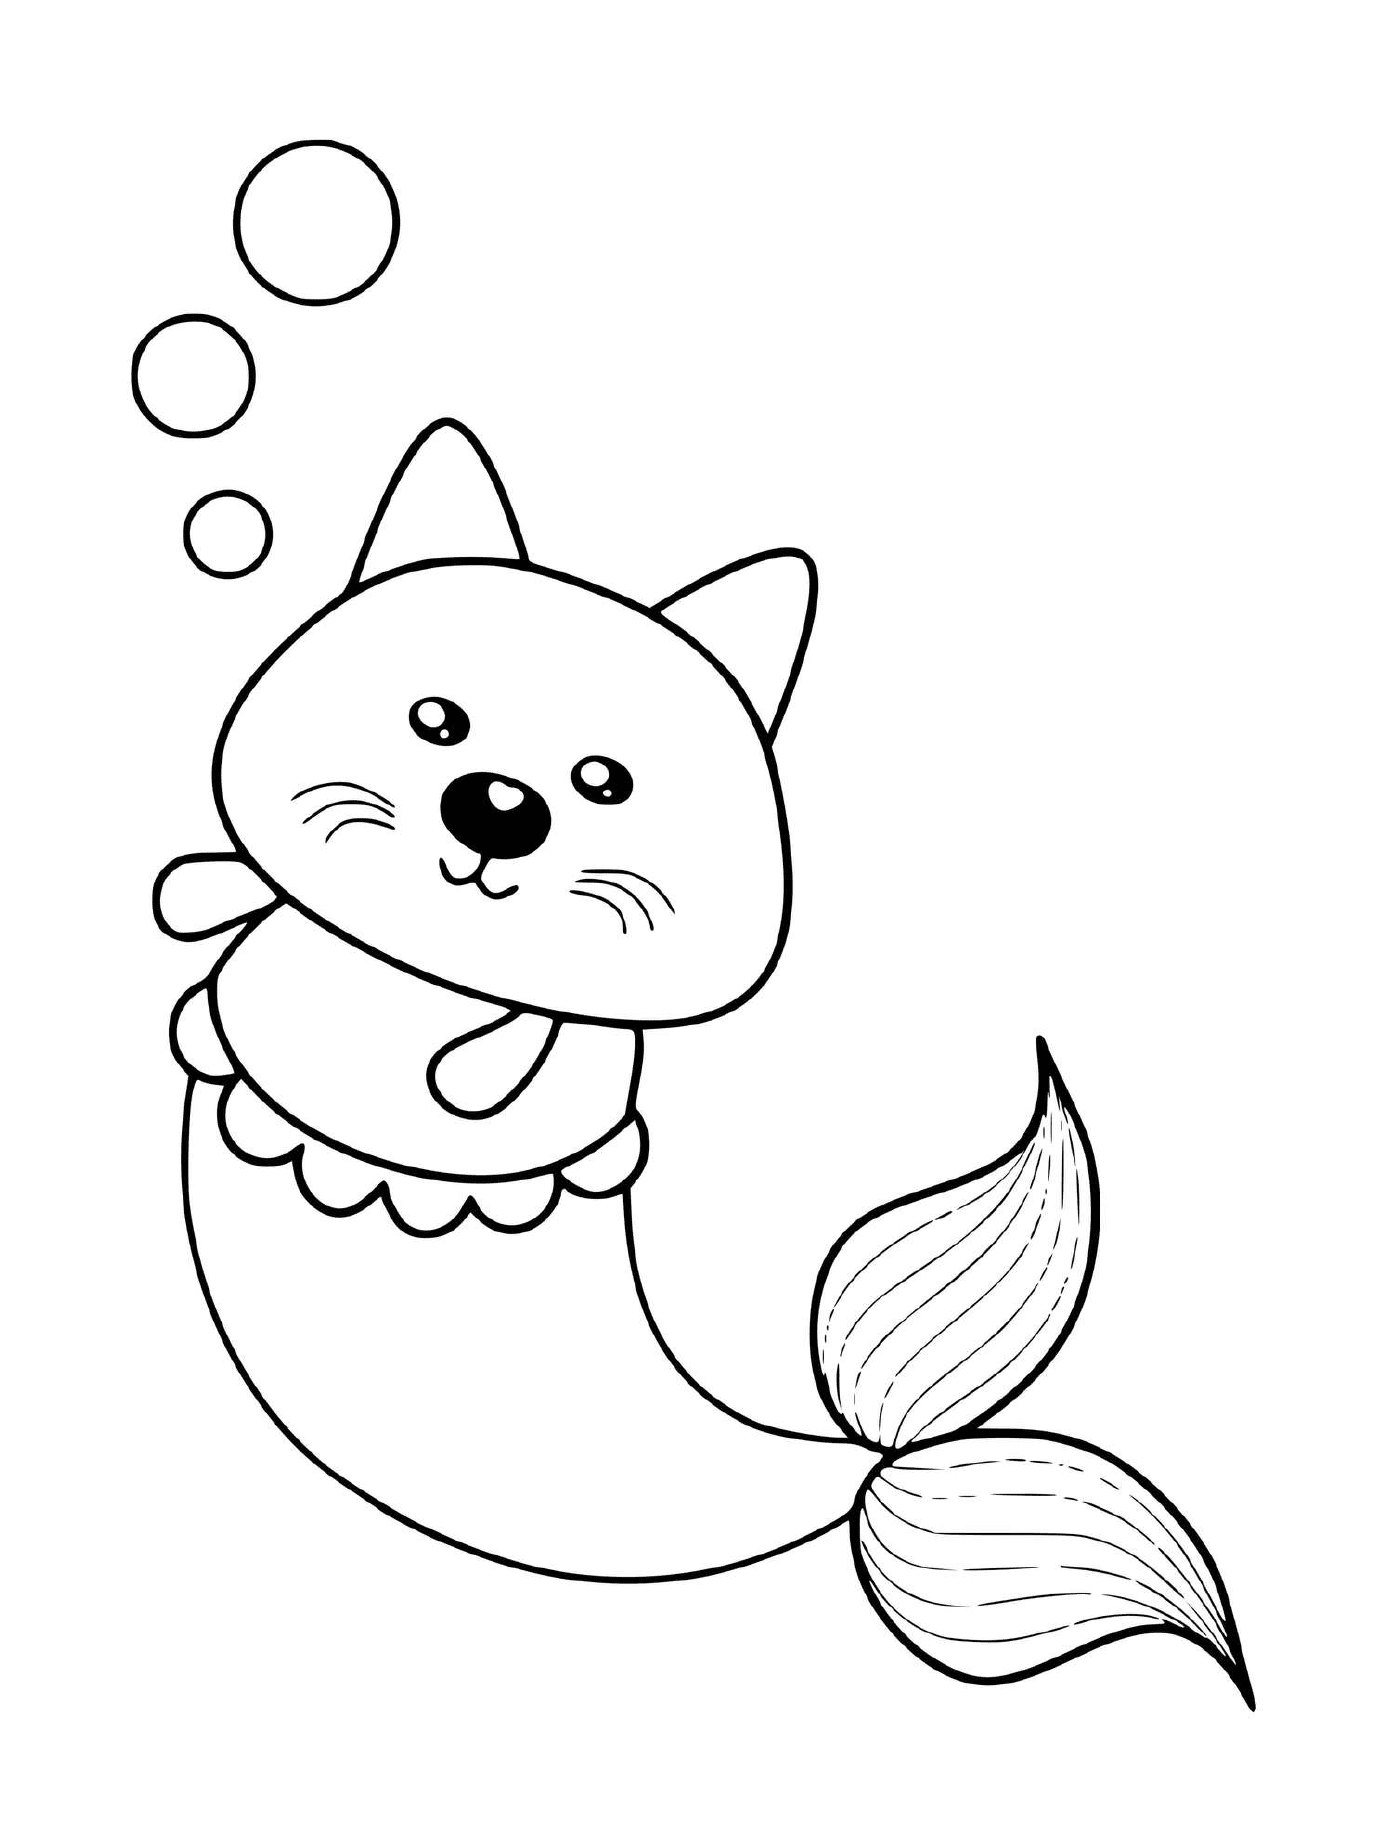 coloriage kitty sirene chat mignon